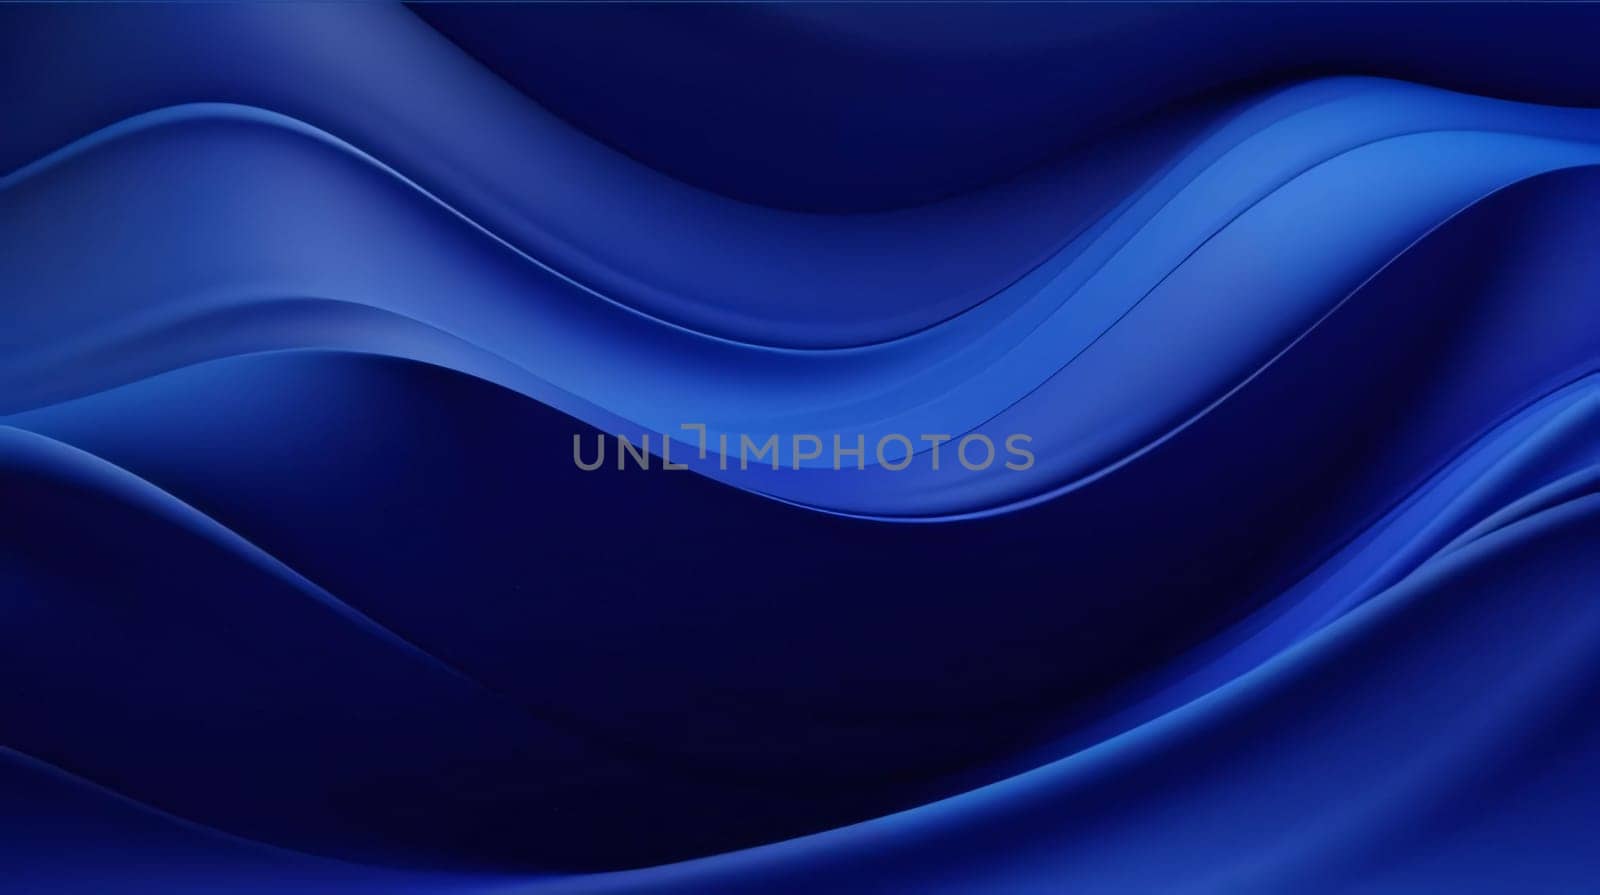 Abstract background design: Abstract blue background with smooth lines. Vector illustration for your design.